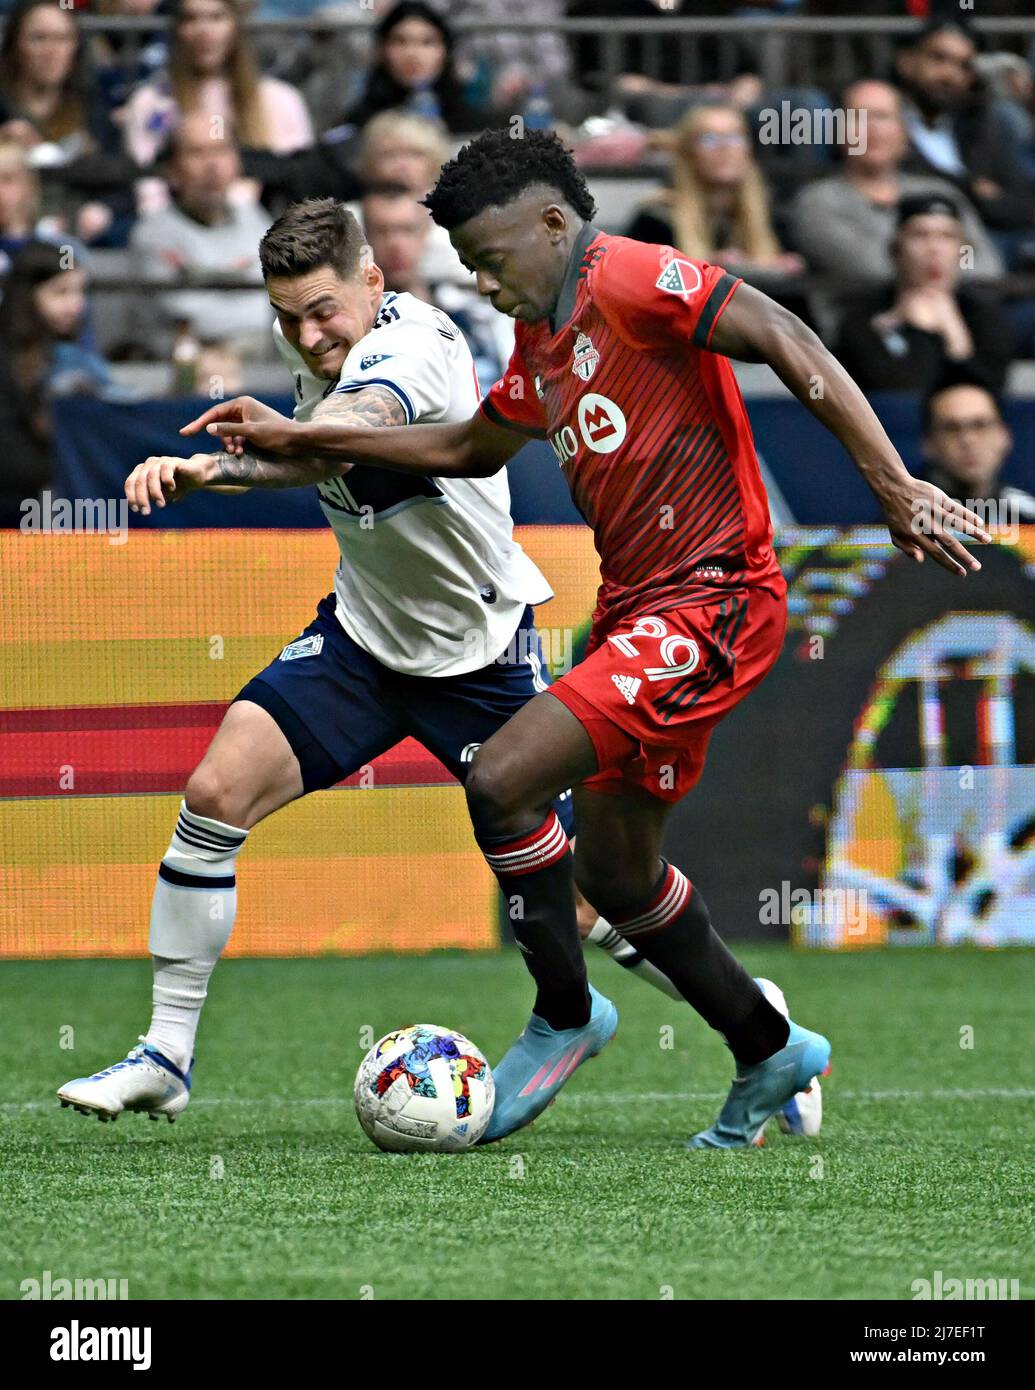 VANCOUVER, May 9, 2022 (Xinhua) -- Jake Nerwinski (L) of Vancouver Whitecaps and Deandre Kerr of Toronto FC compete during their MLS regular season football match in Vancouver, Canada, May 8, 2022. (Photo by Andrew Soong/Xinhua) Stock Photo